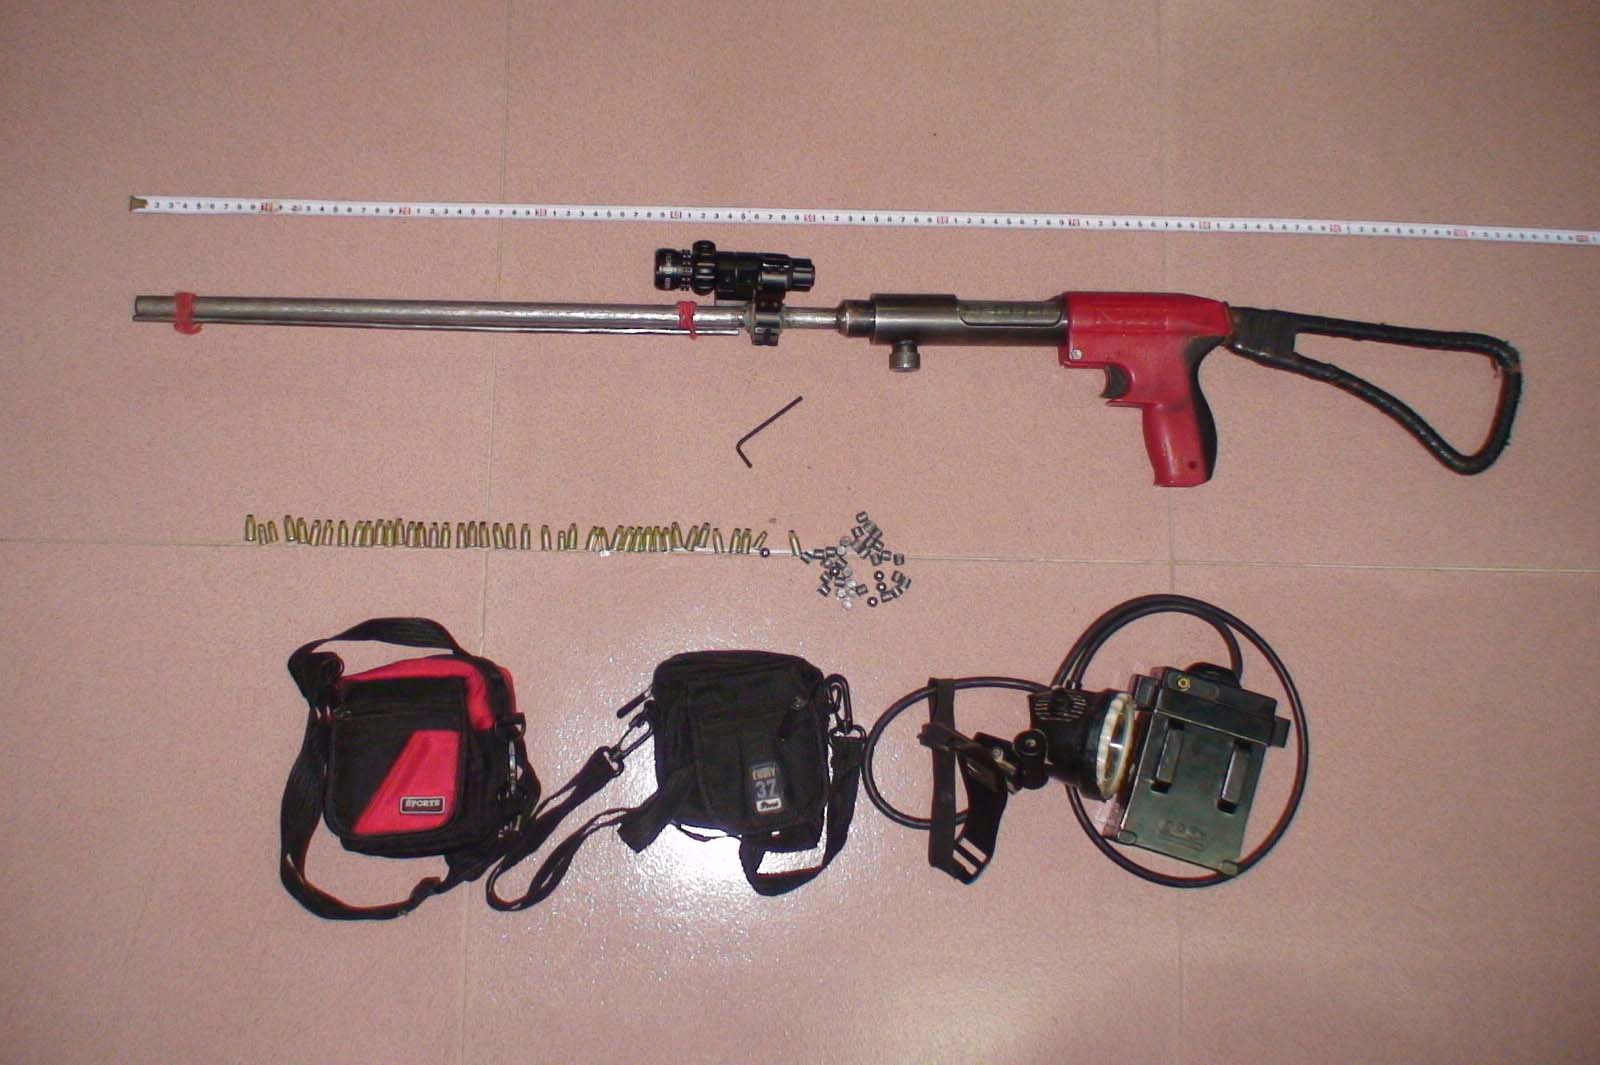 Various .22 ramset type nail gun adaptions commonly seized during poaching related arrests in China.